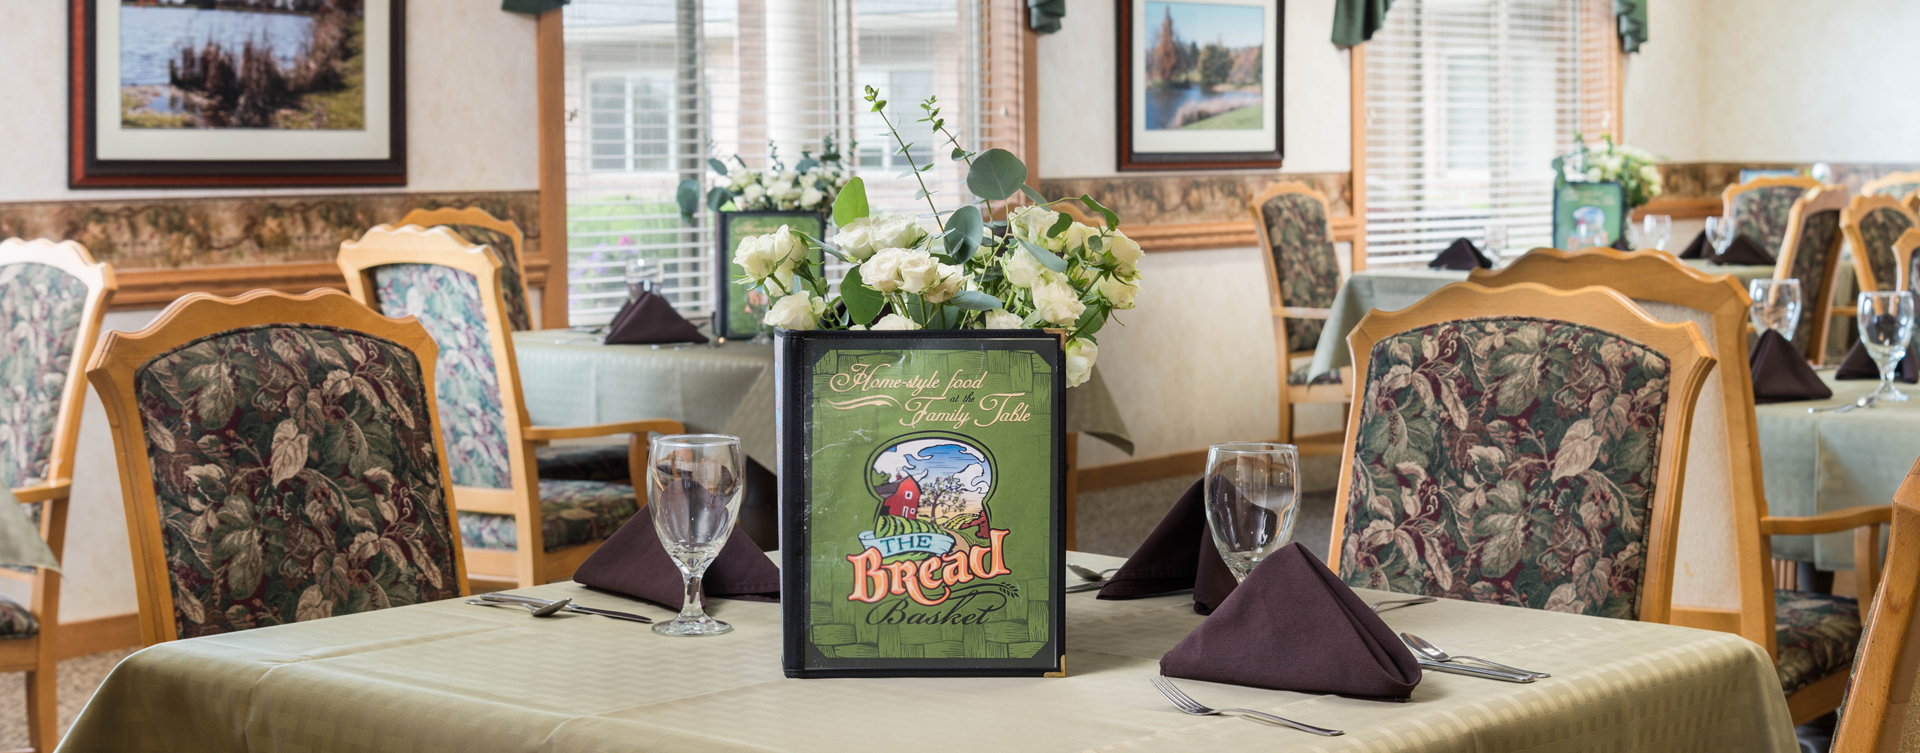 Food is best when shared with friends in the dining room at Bickford of Middletown